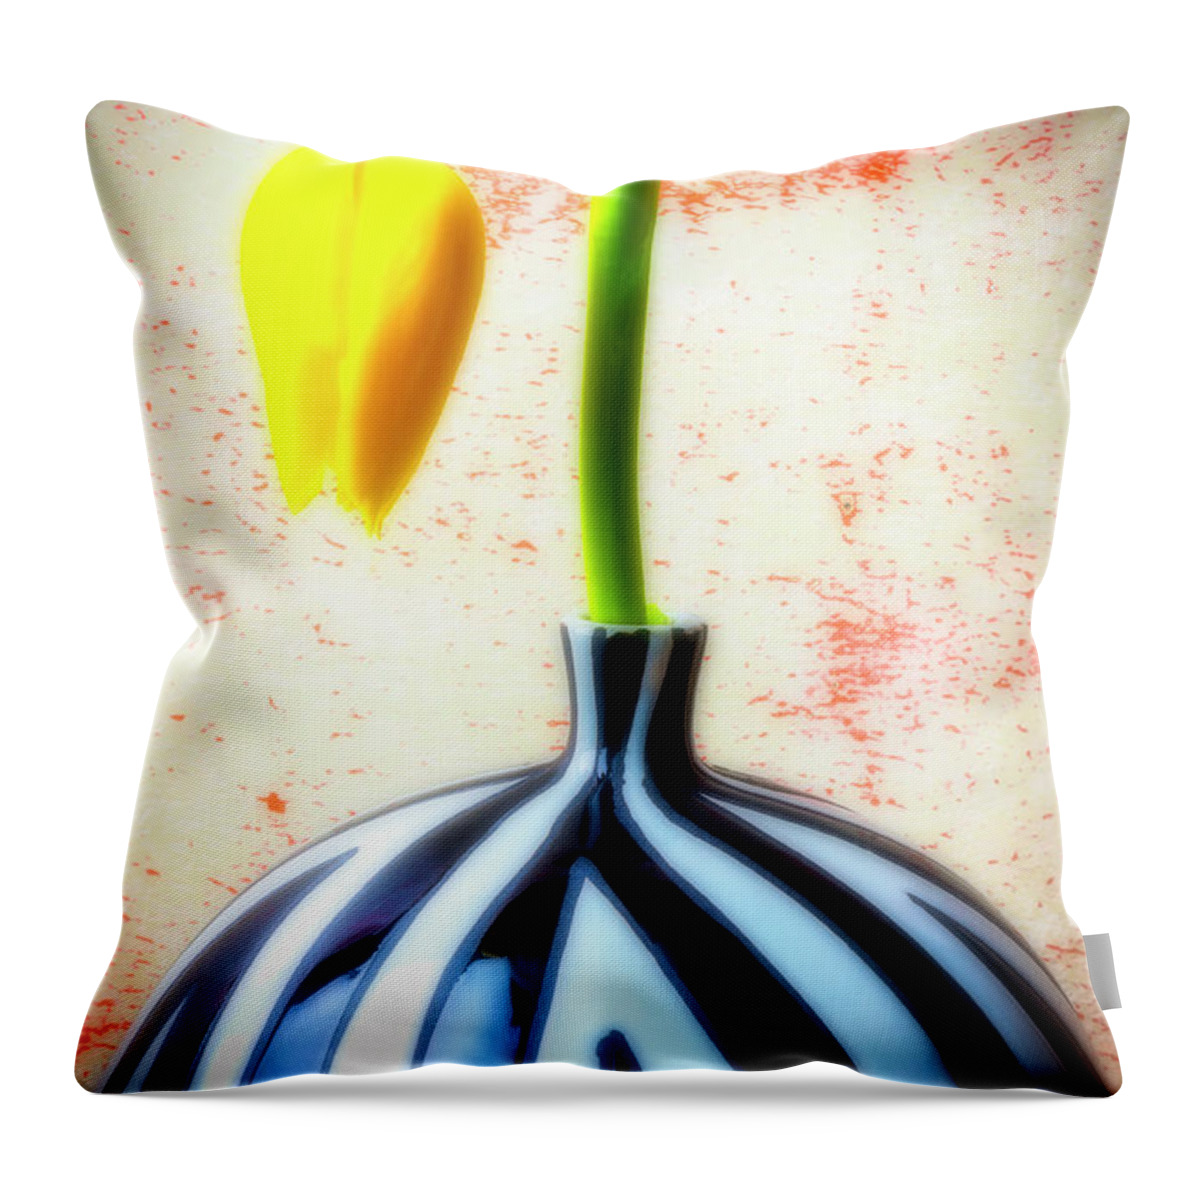 Graphic Throw Pillow featuring the photograph Yellow Tulip In Striped Vase #1 by Garry Gay